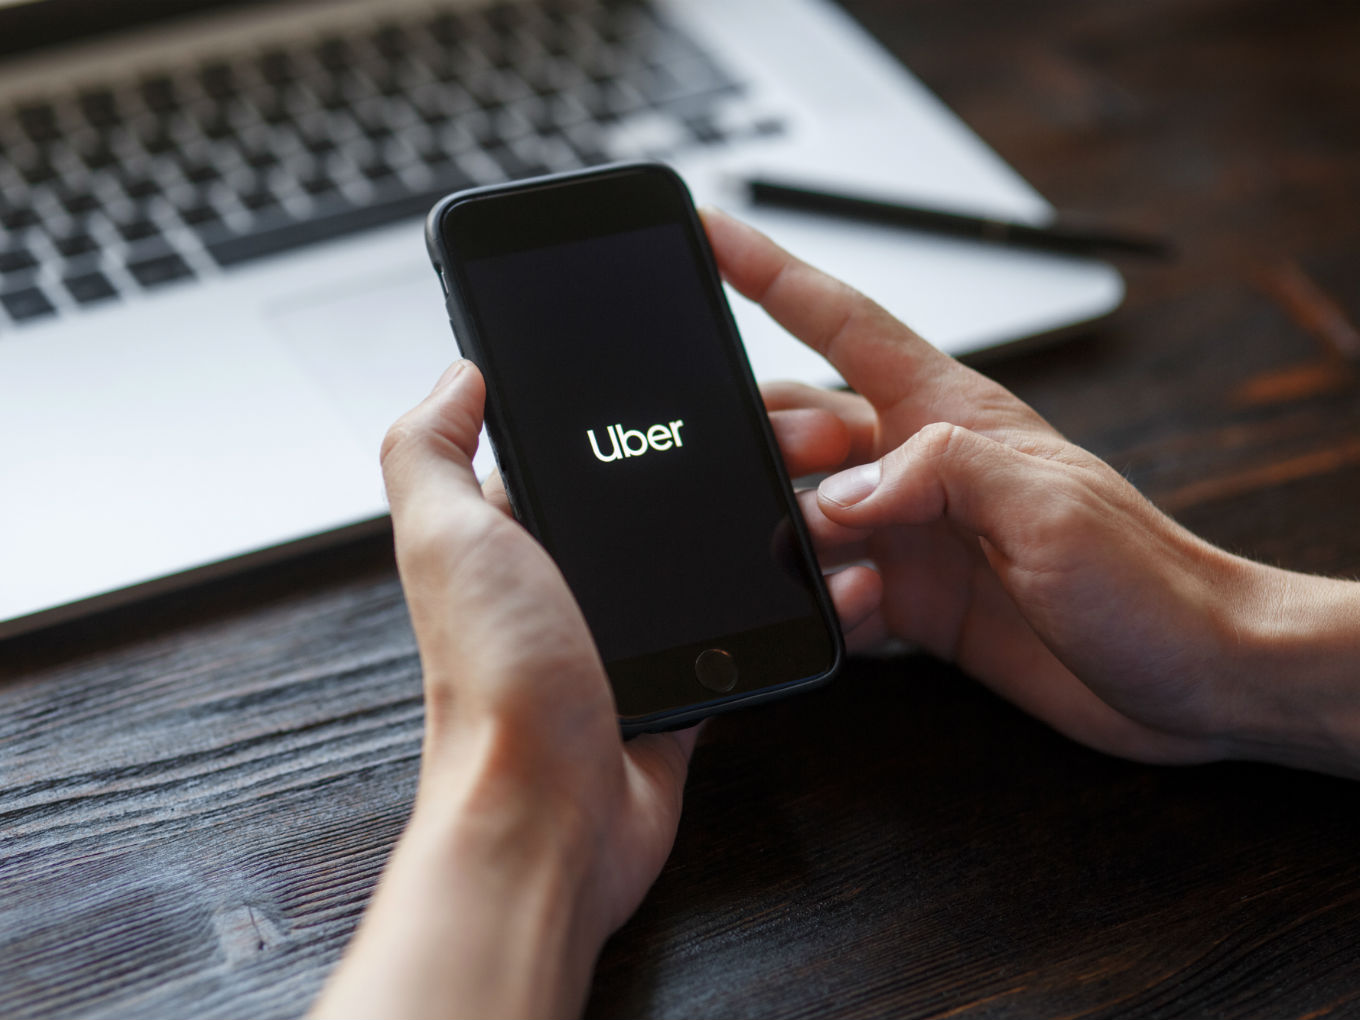 Uber Launches Ola-Like PIN Verification, Other Initiatives For Safety